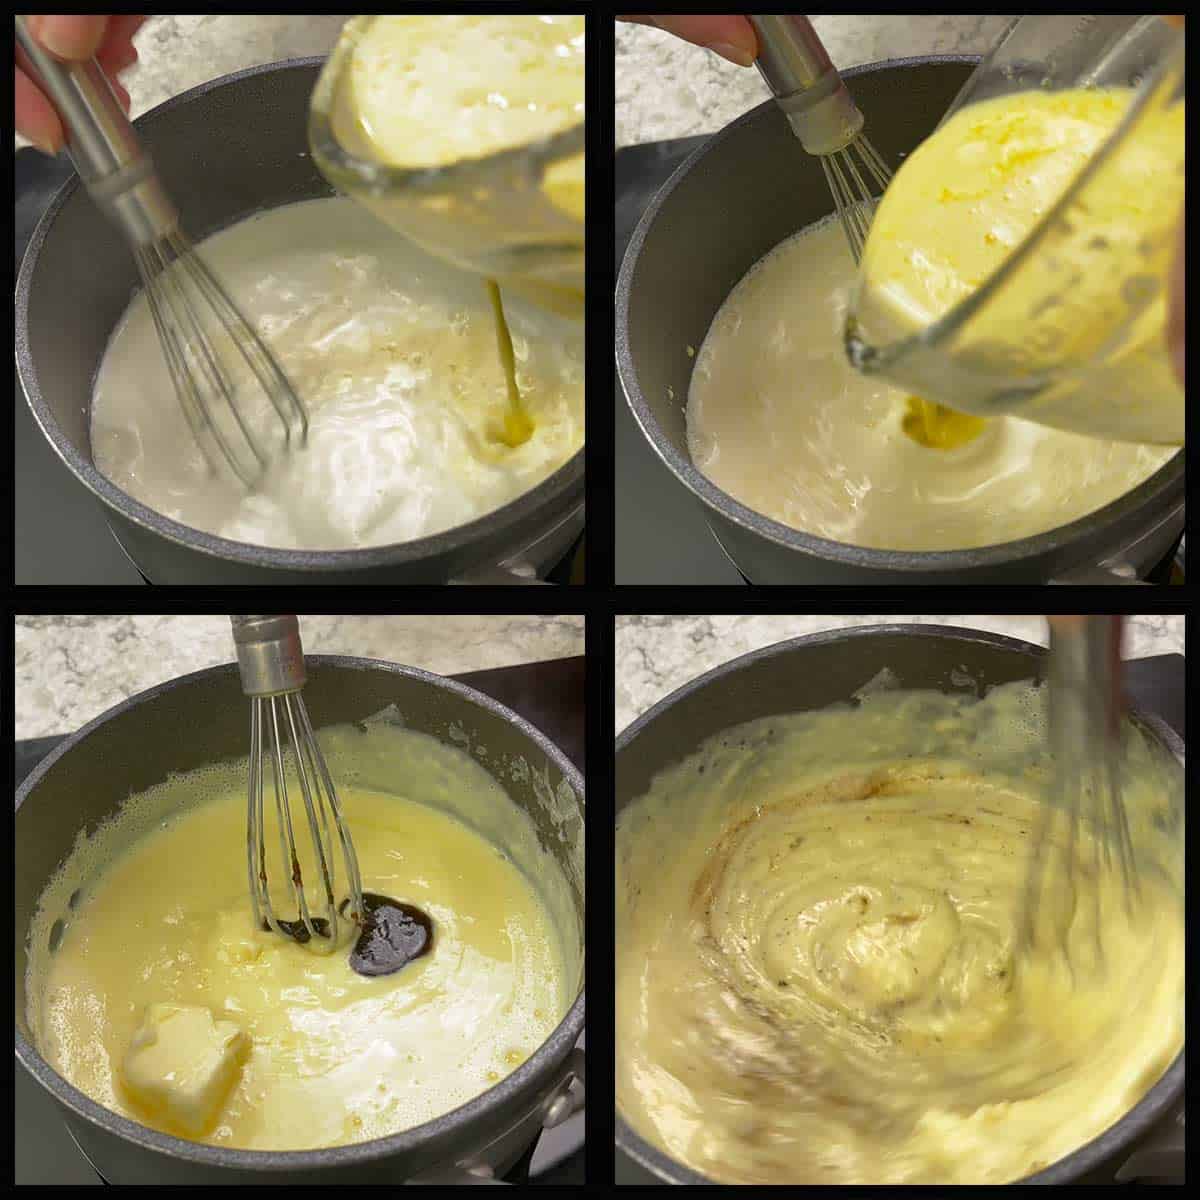 adding the egg mixture to the hot milk and whisking in butter and vanilla to finish the pastry cream.